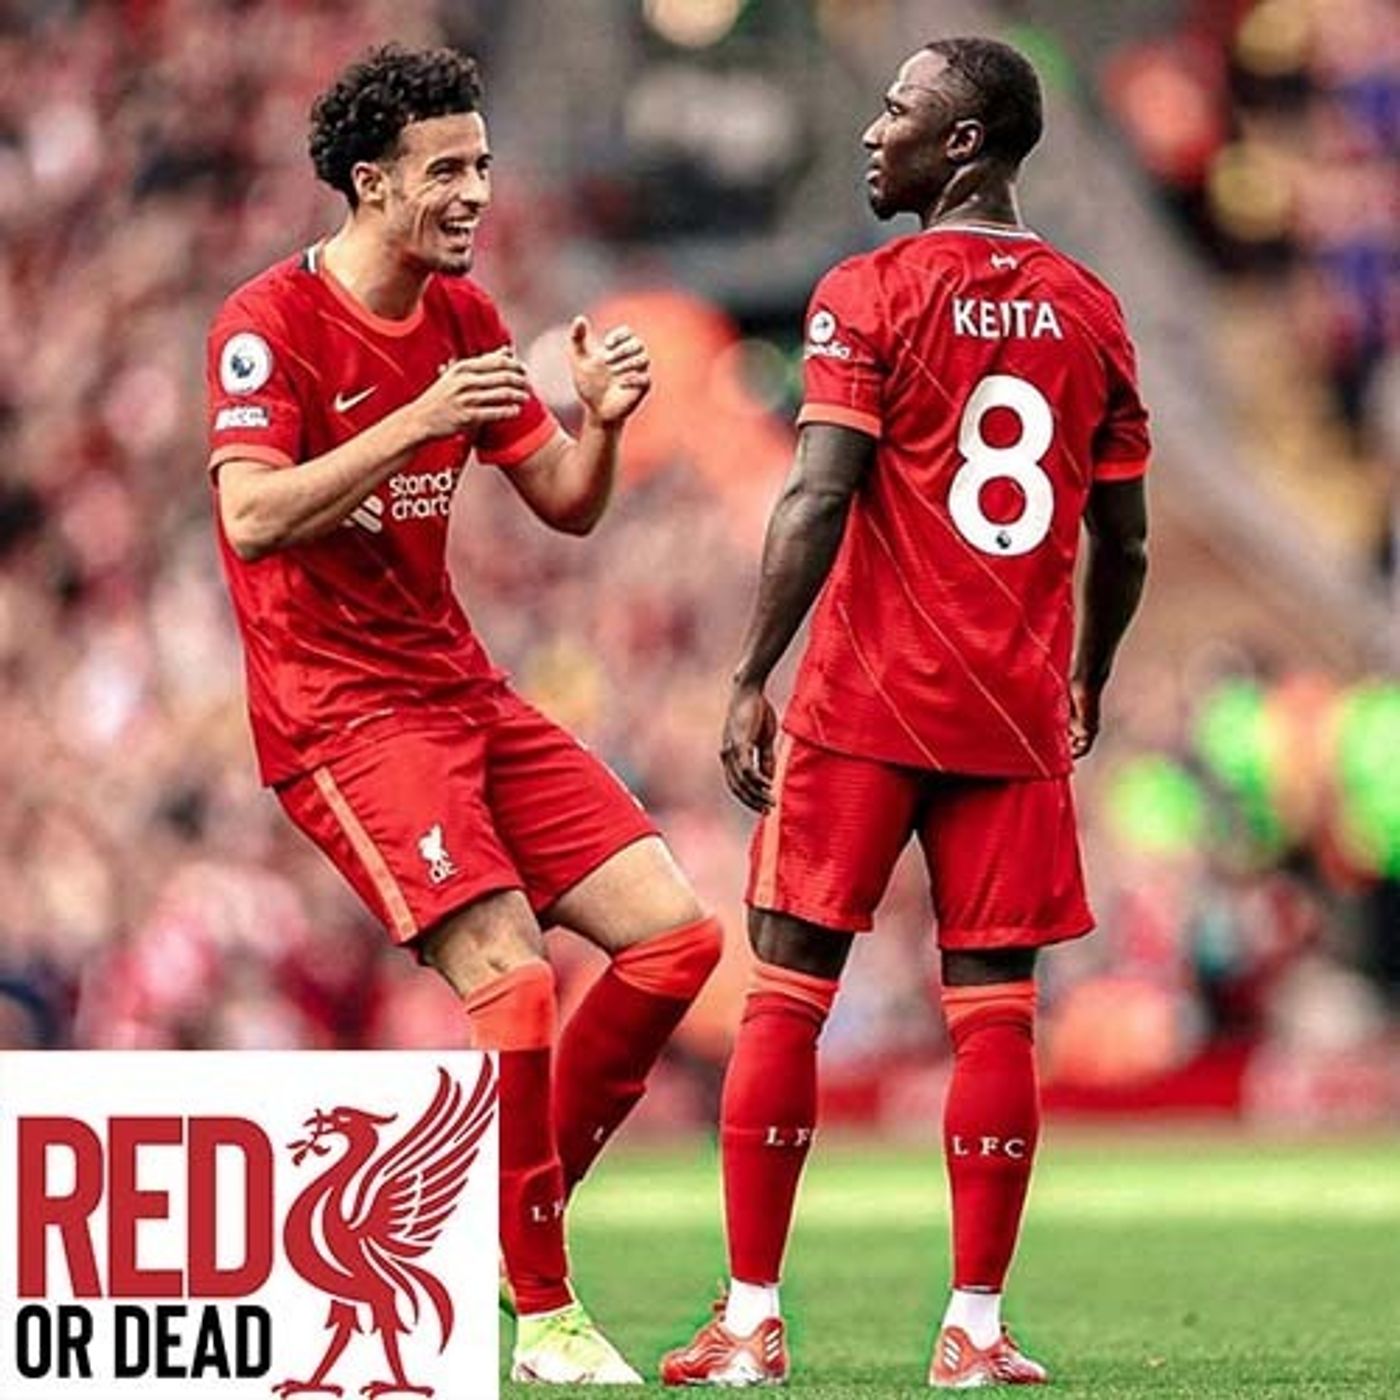 S1 Ep48: The Red Or Dead Podcast - Episode 48